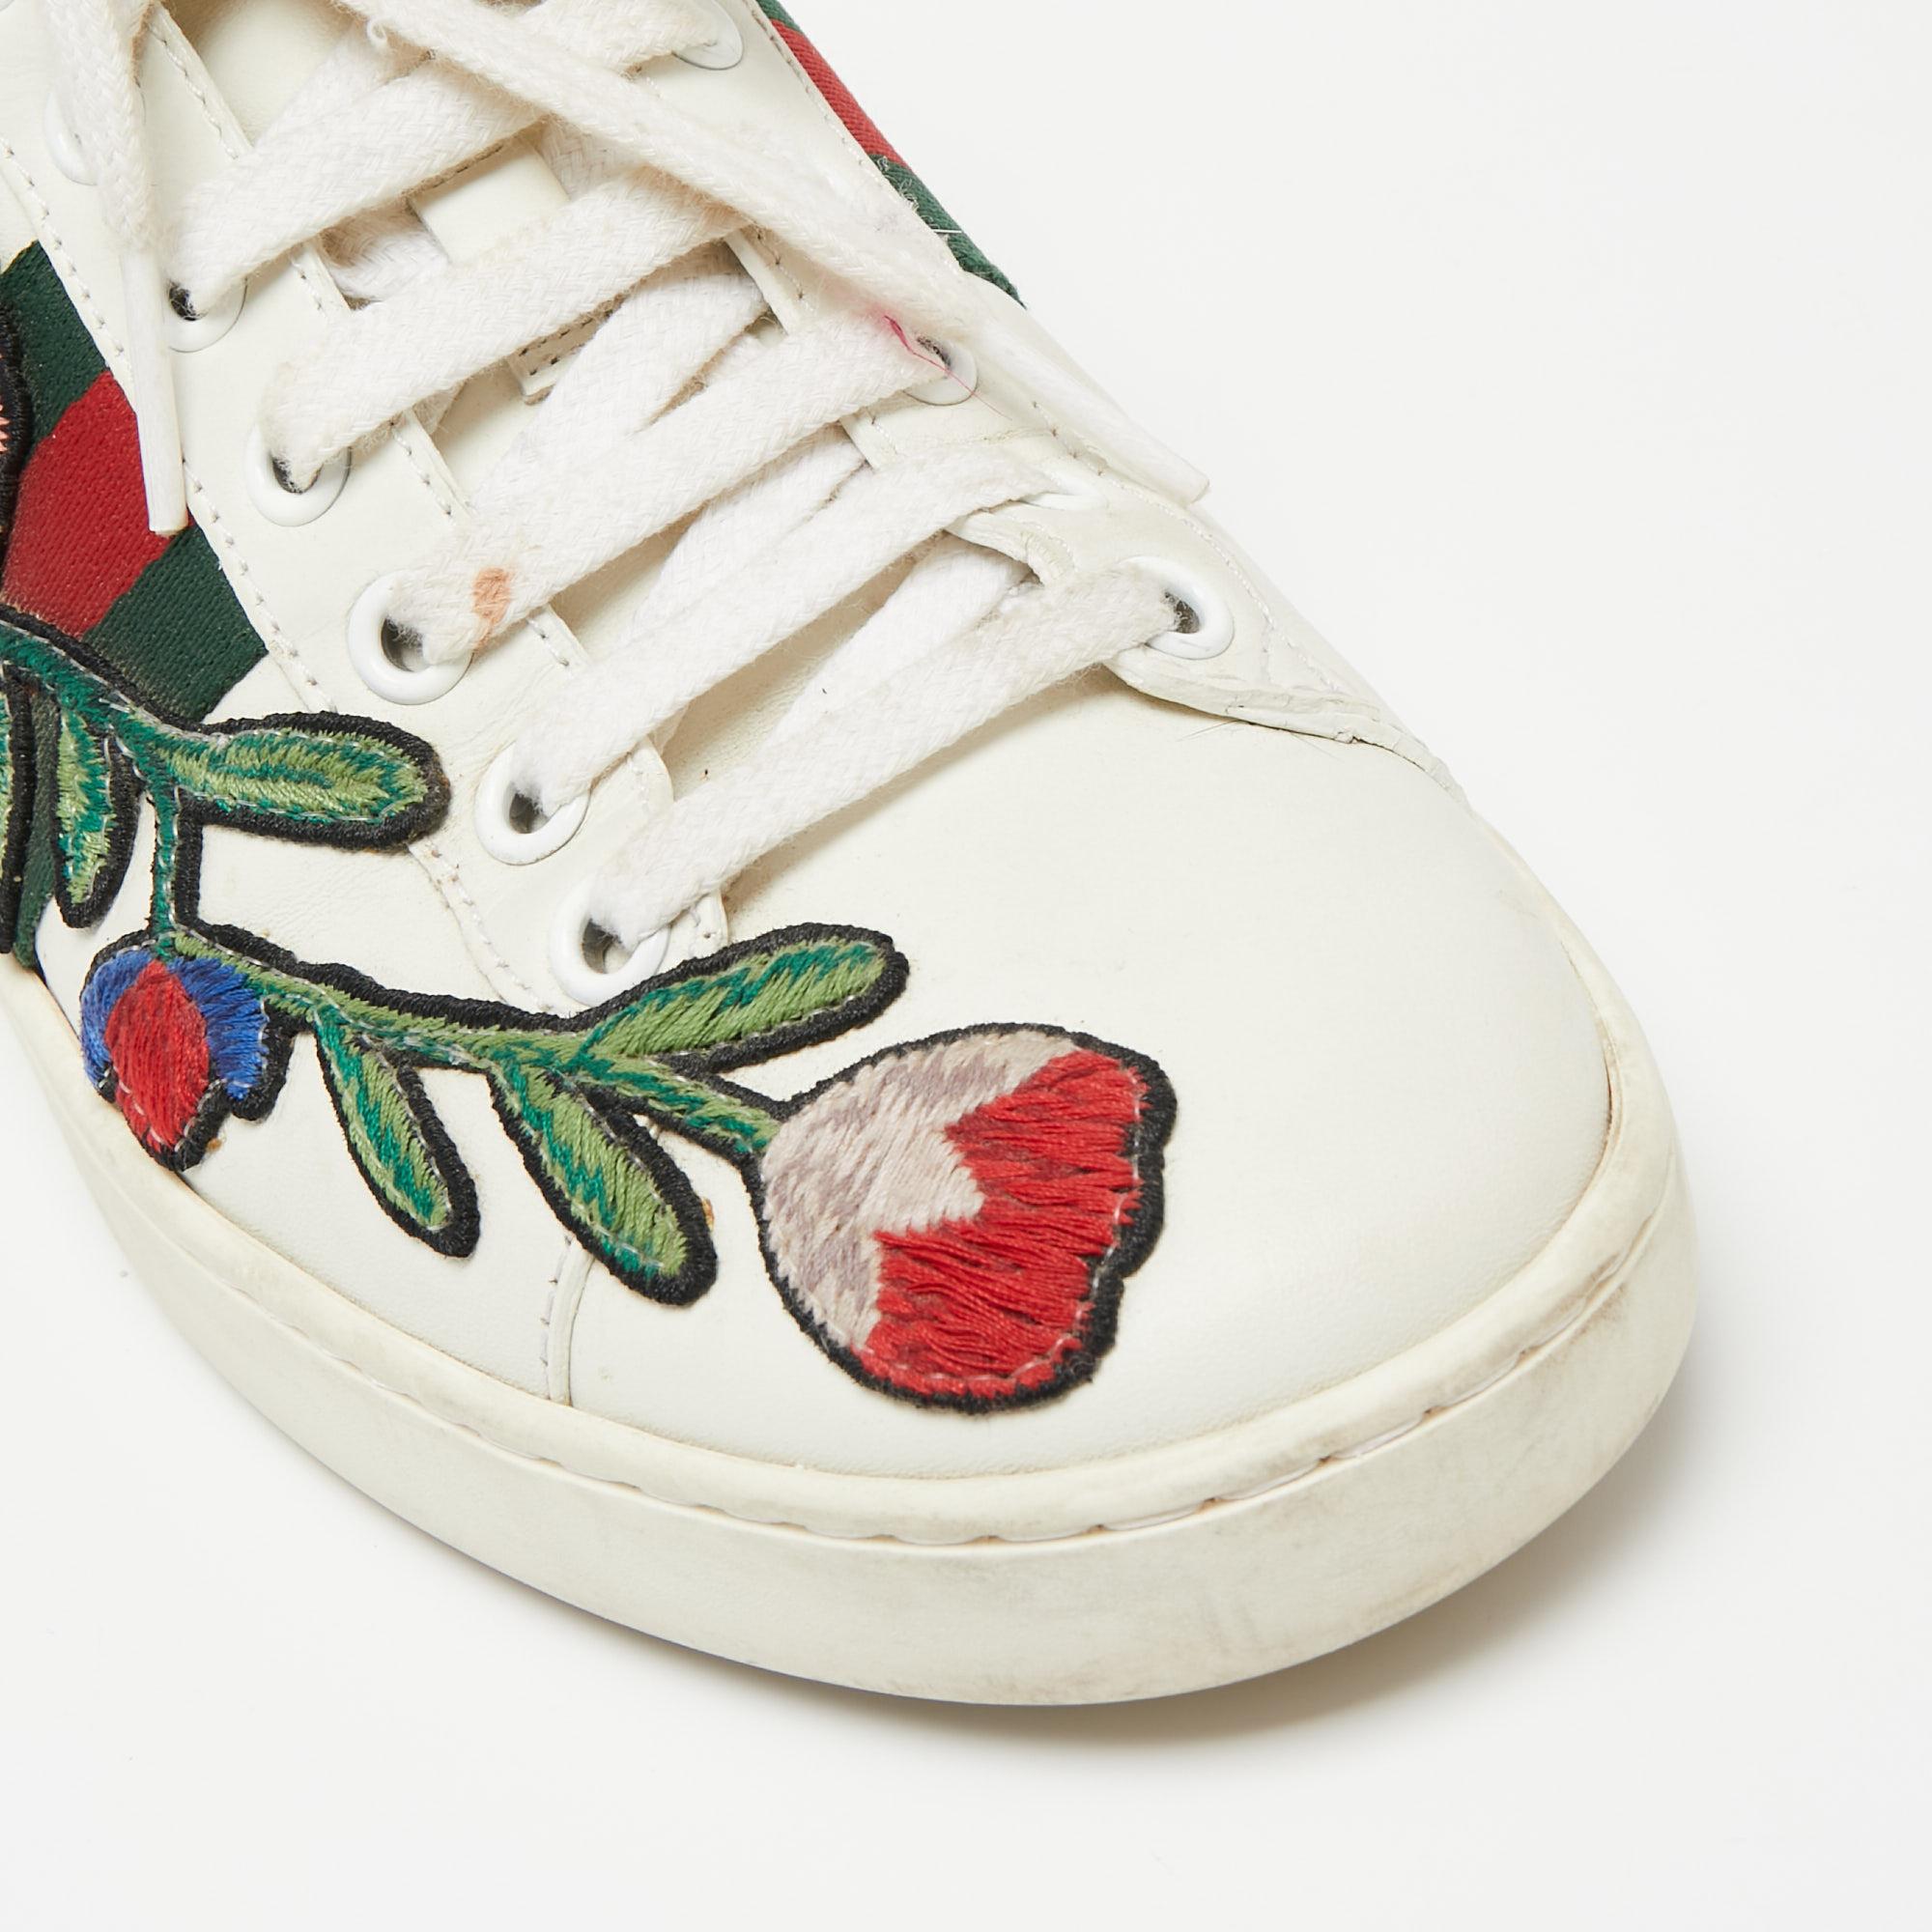 gucci ace floral embroidered sneakers